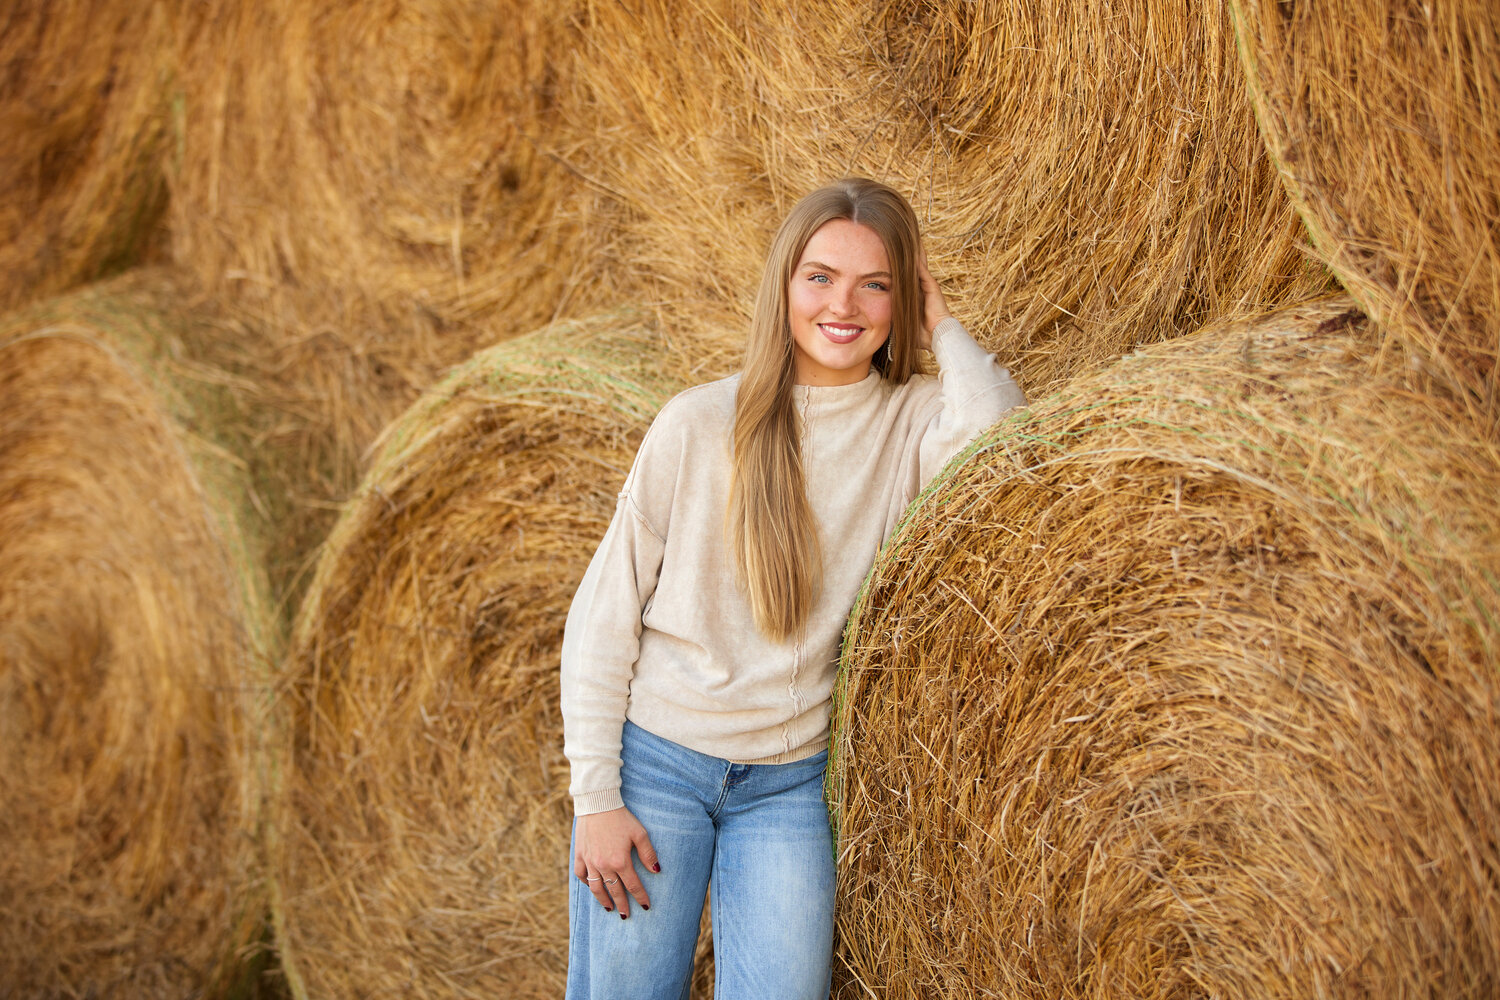 Avery Shalla 
Riverside Ramblers, Riverside Enterprisers

“I have learned so many life lessons while being in 4-H and have made so many lifelong friendships. I think 4-H is absolutely the best thing to be a member of!”
           
Future plans: Iowa State University